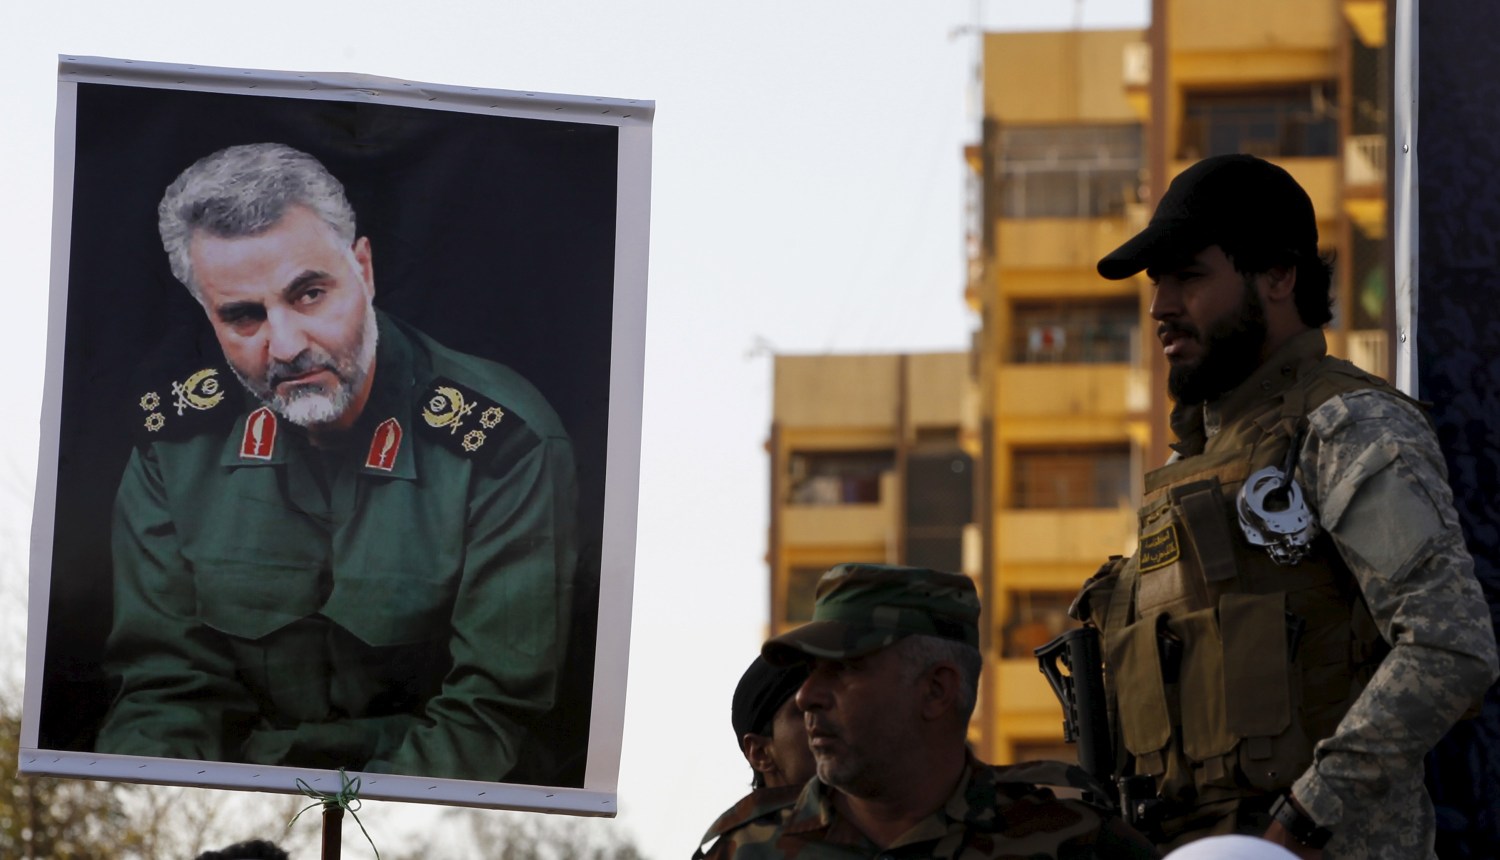 Members from Hashid Shaabi hold a portrait of Quds Force Commander Major General Qassem Suleimani during a demonstration in Baghdad to show support for Yemen's Shi'ite Houthis and in protest of the Saudi-led air campaign in Yemen .